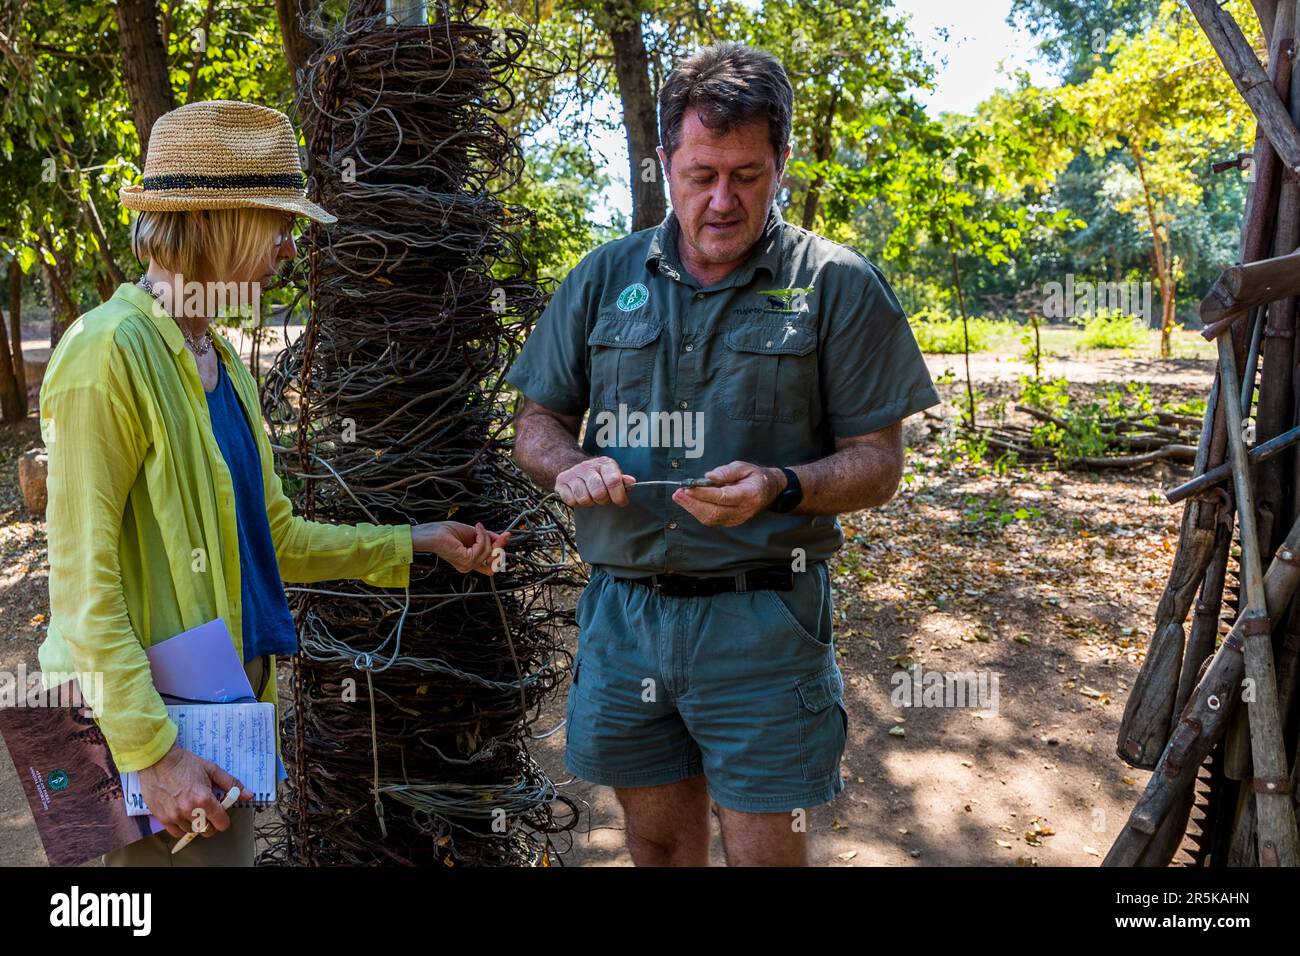 Confiscated weapons and traps used by poachers in the area of Majete National Park, Malawi. Majete Wildlife Reserve, Park Manager John Adendorff shows journalist Angela Berg how poachers lay metal snares Stock Photo